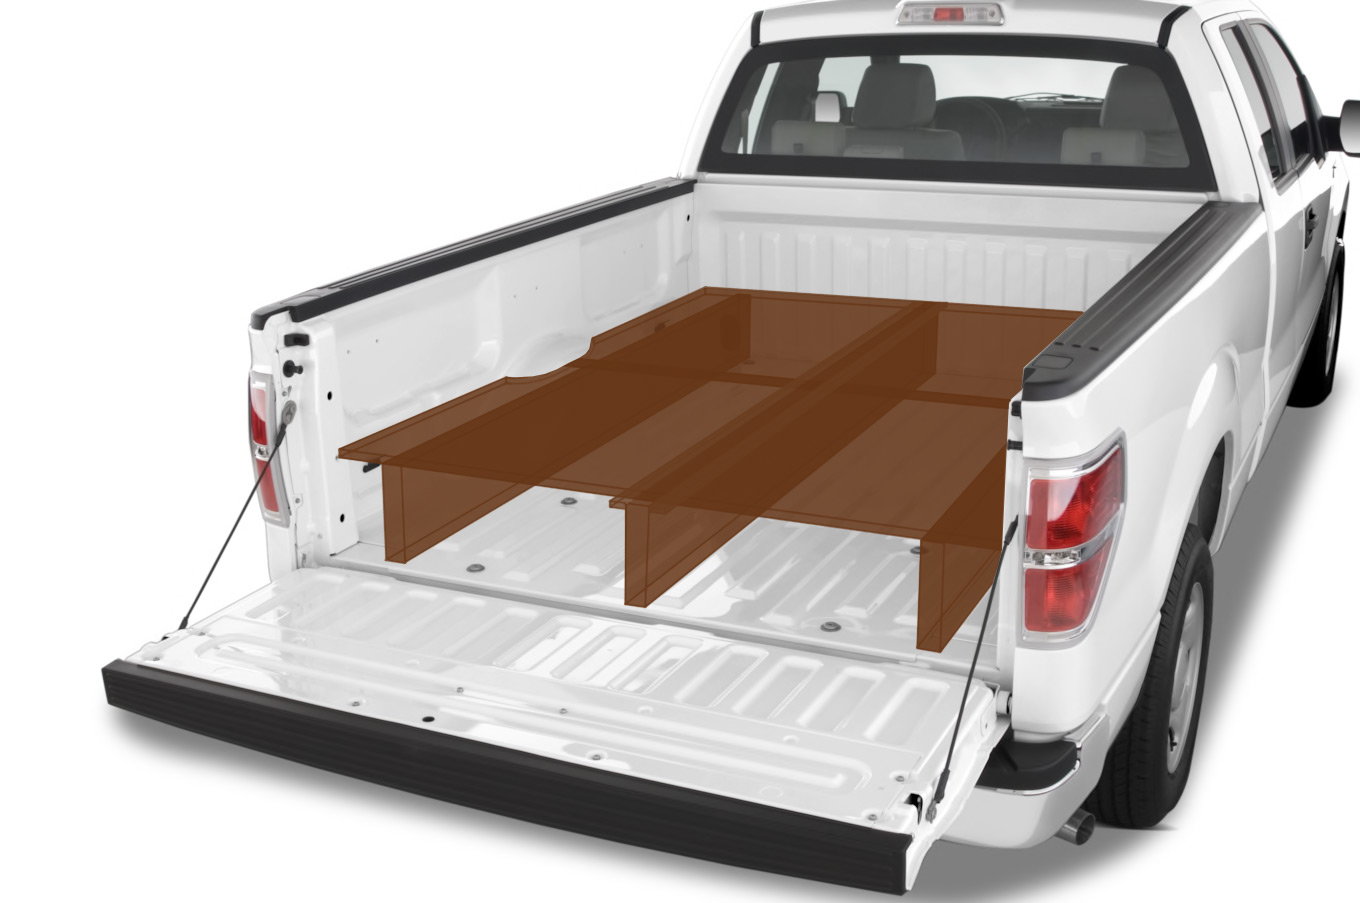 F-150 Sleeping Platform in truck bed (Leer shell on top) - Page 3